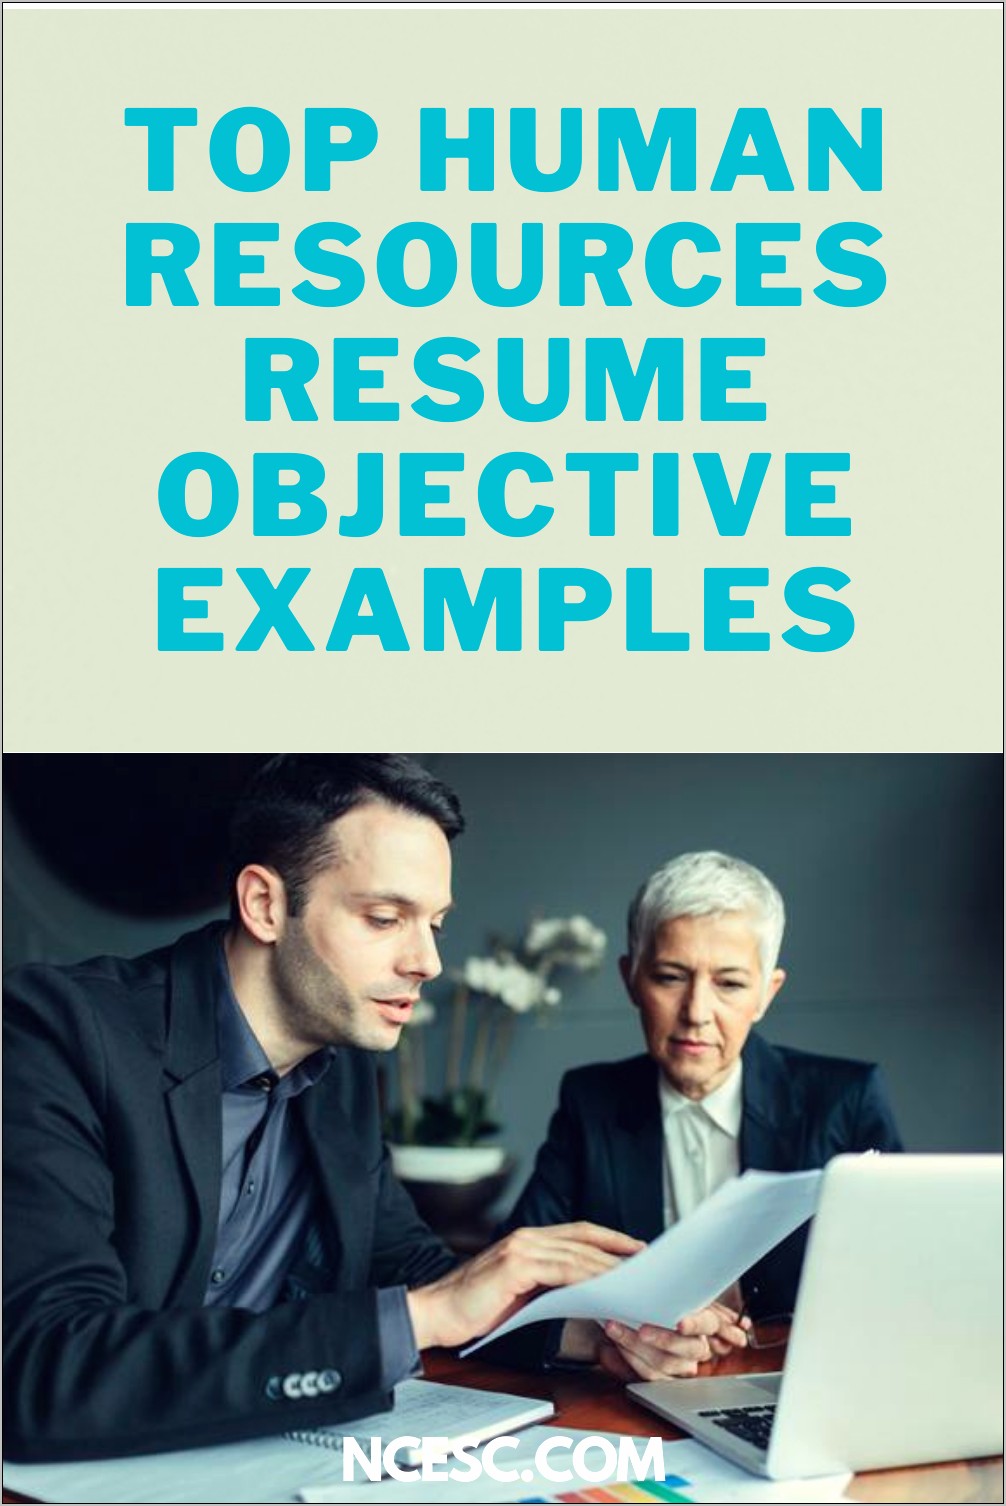 Human Resources Resume Objective Statement